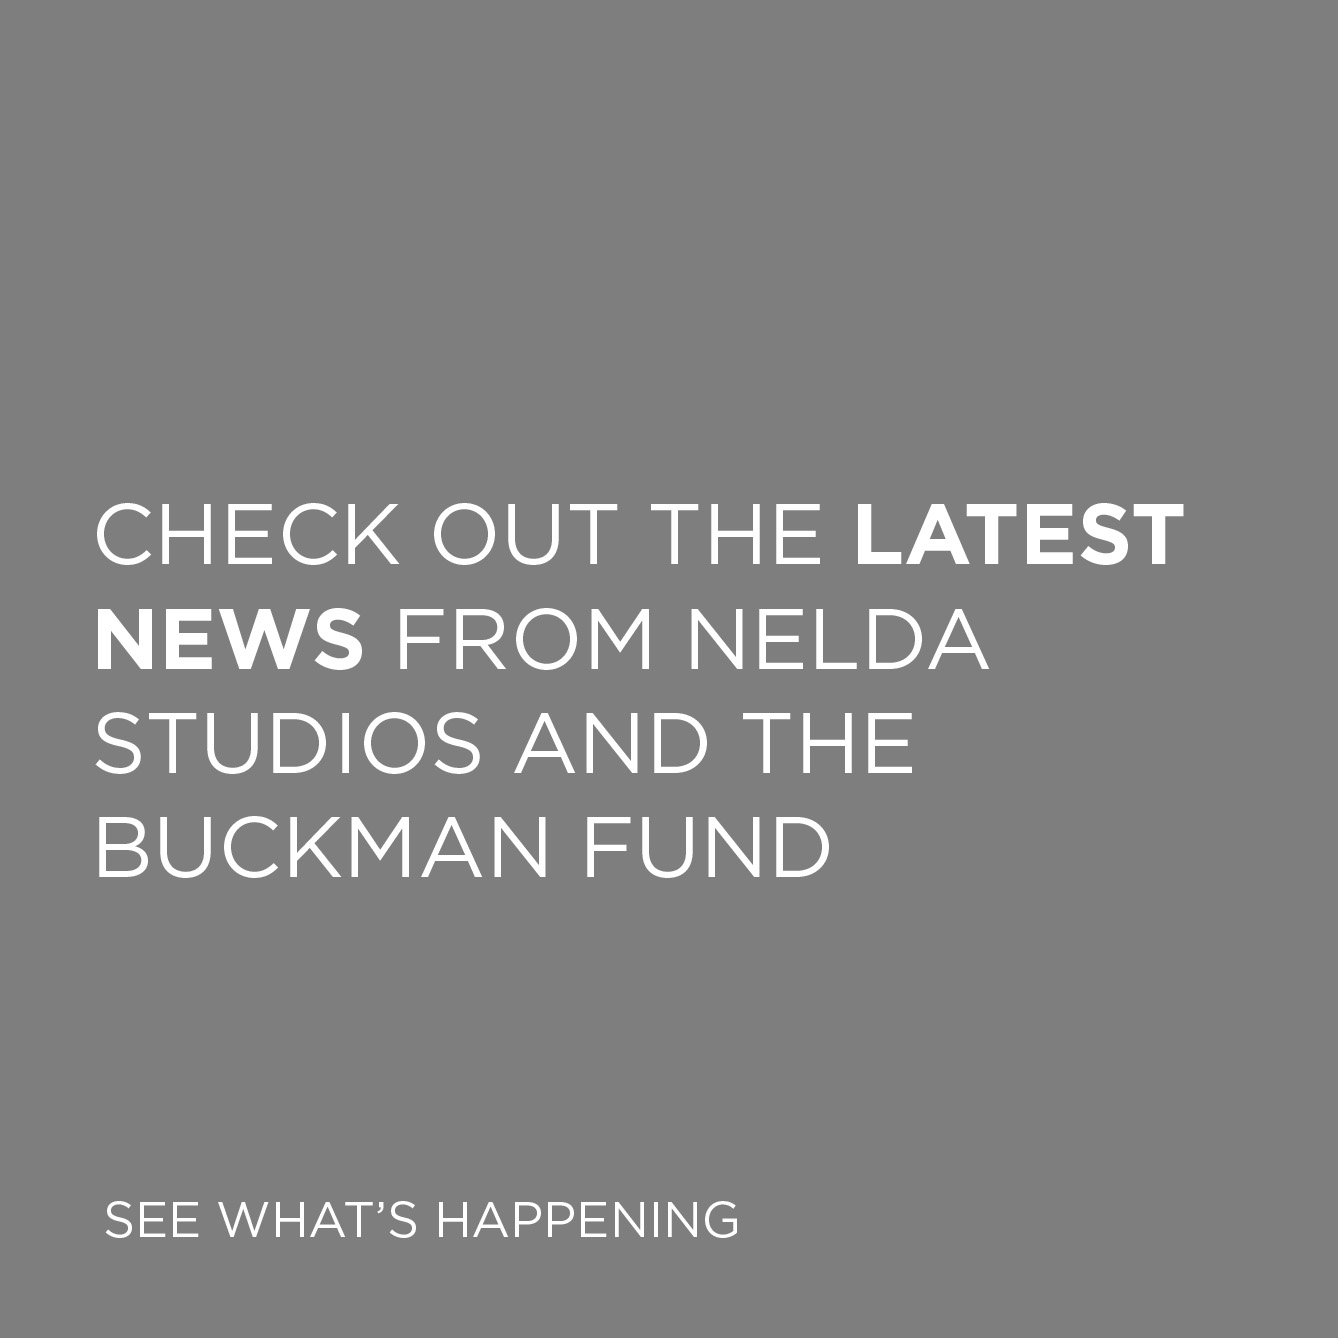 Check out the latest news from Nelda Studios and the Buckman Fund – learn more